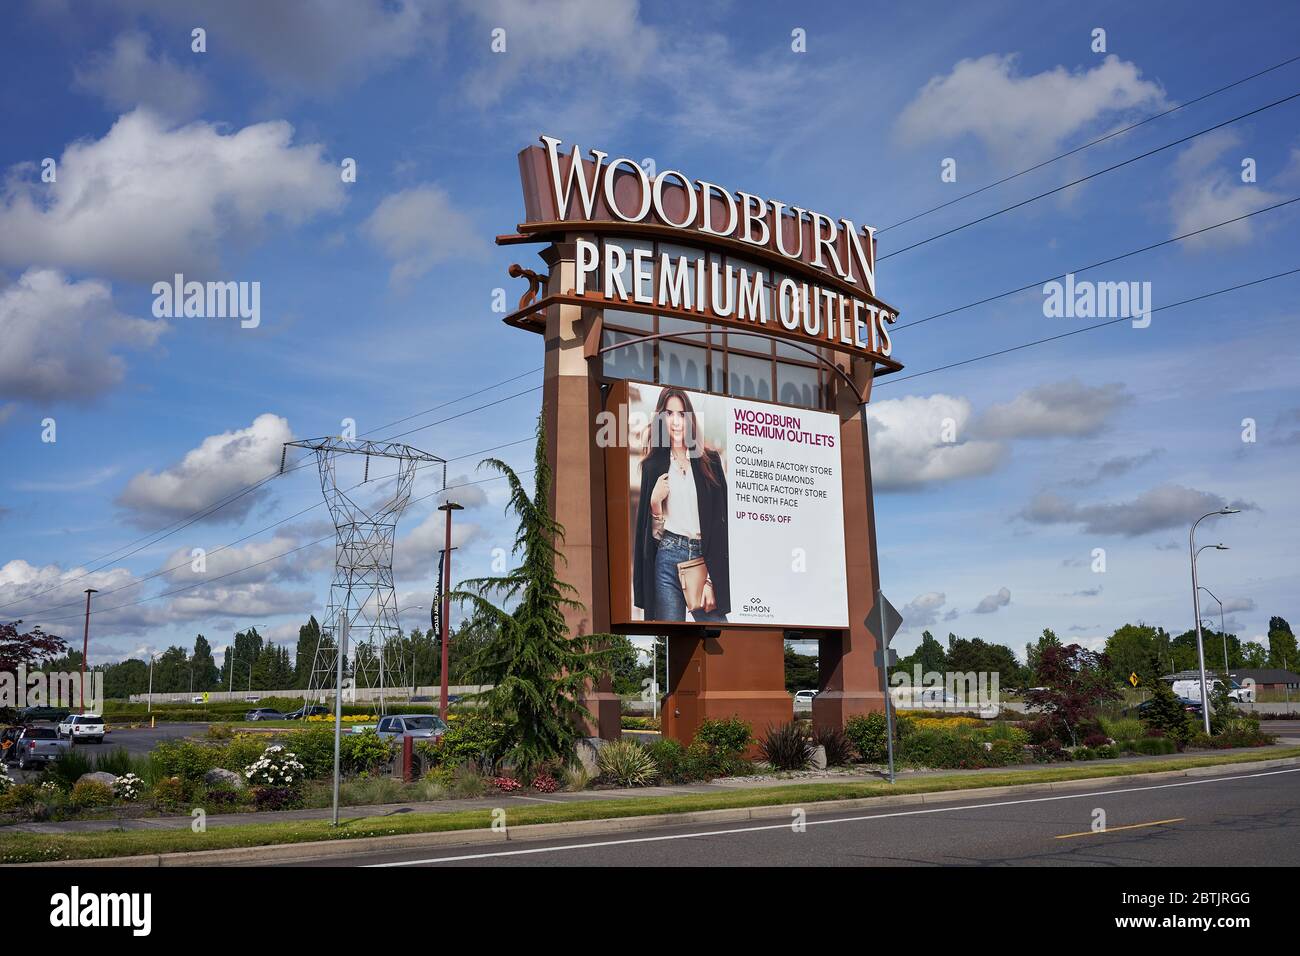 Woodburn Premium Outlets, an outlet mall in Woodburn, Oregon, reopened on Memorial Day weekend after closing for over 2 months amid COVID-19 pandemic. Stock Photo